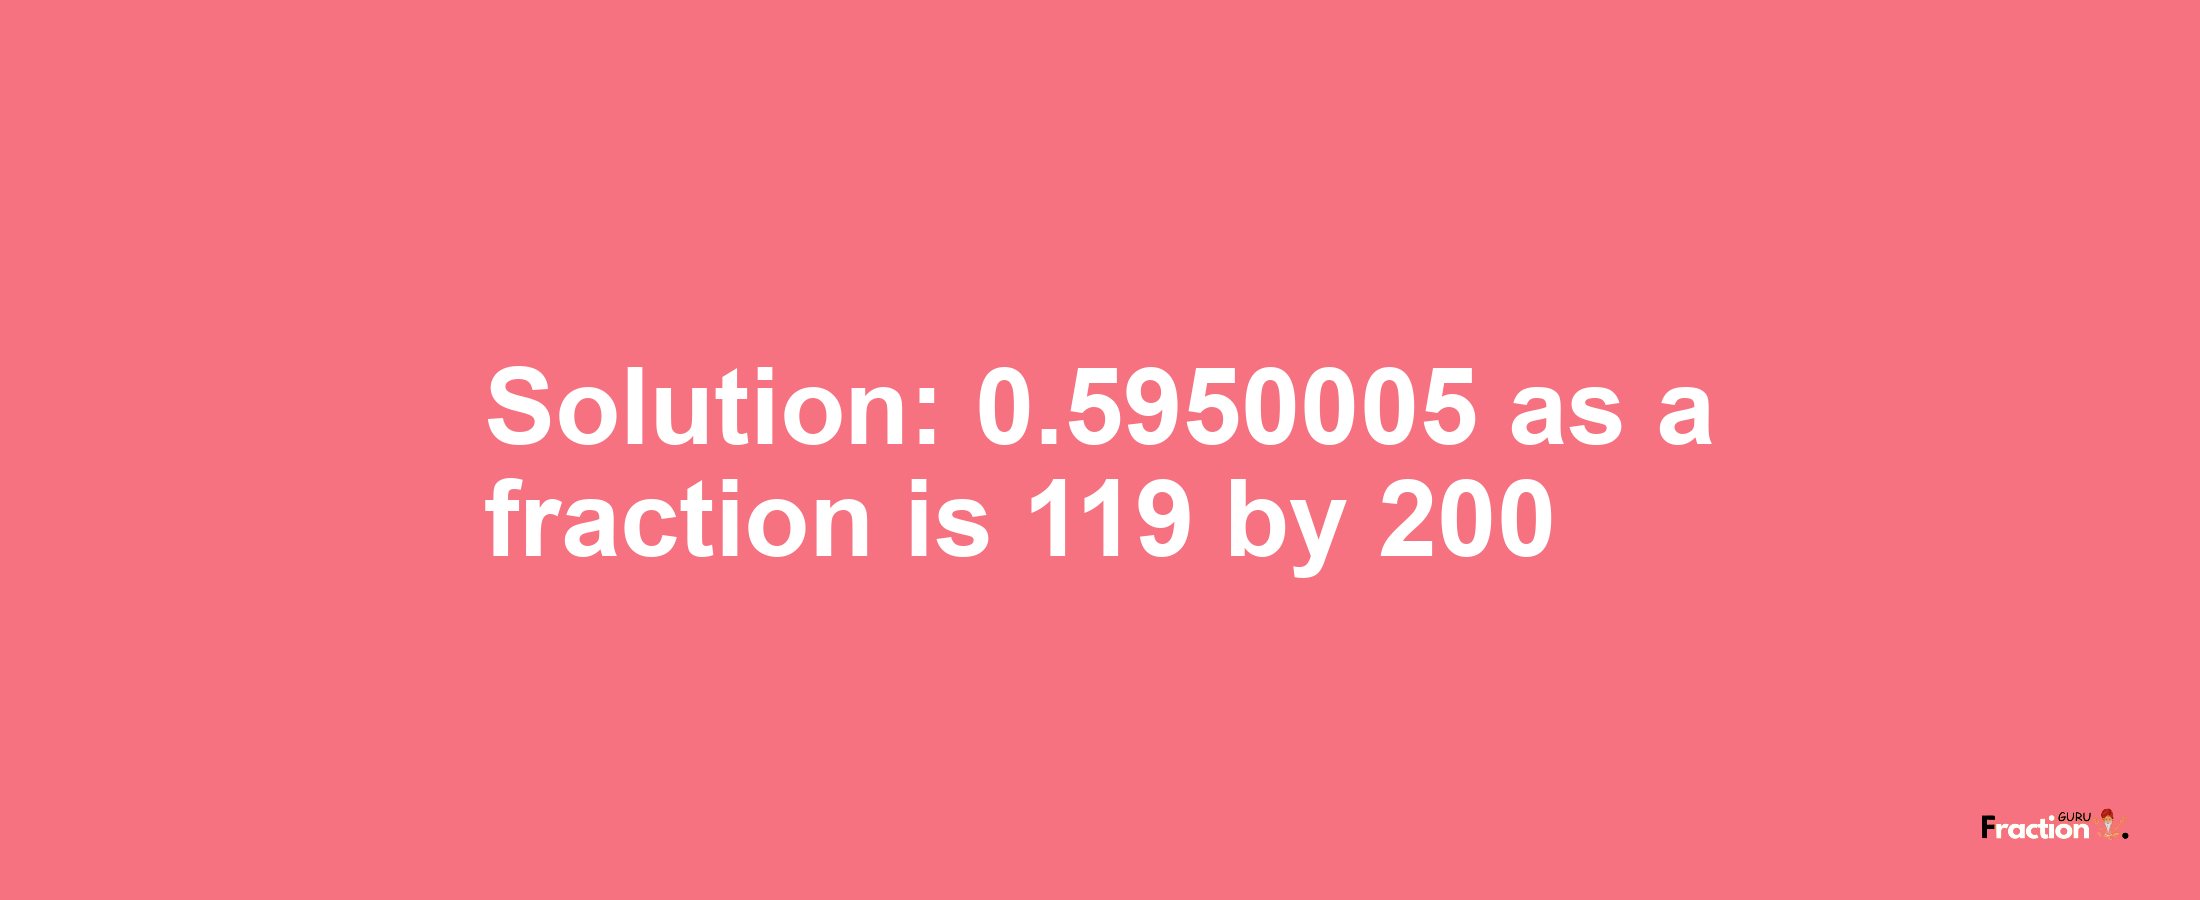 Solution:0.5950005 as a fraction is 119/200